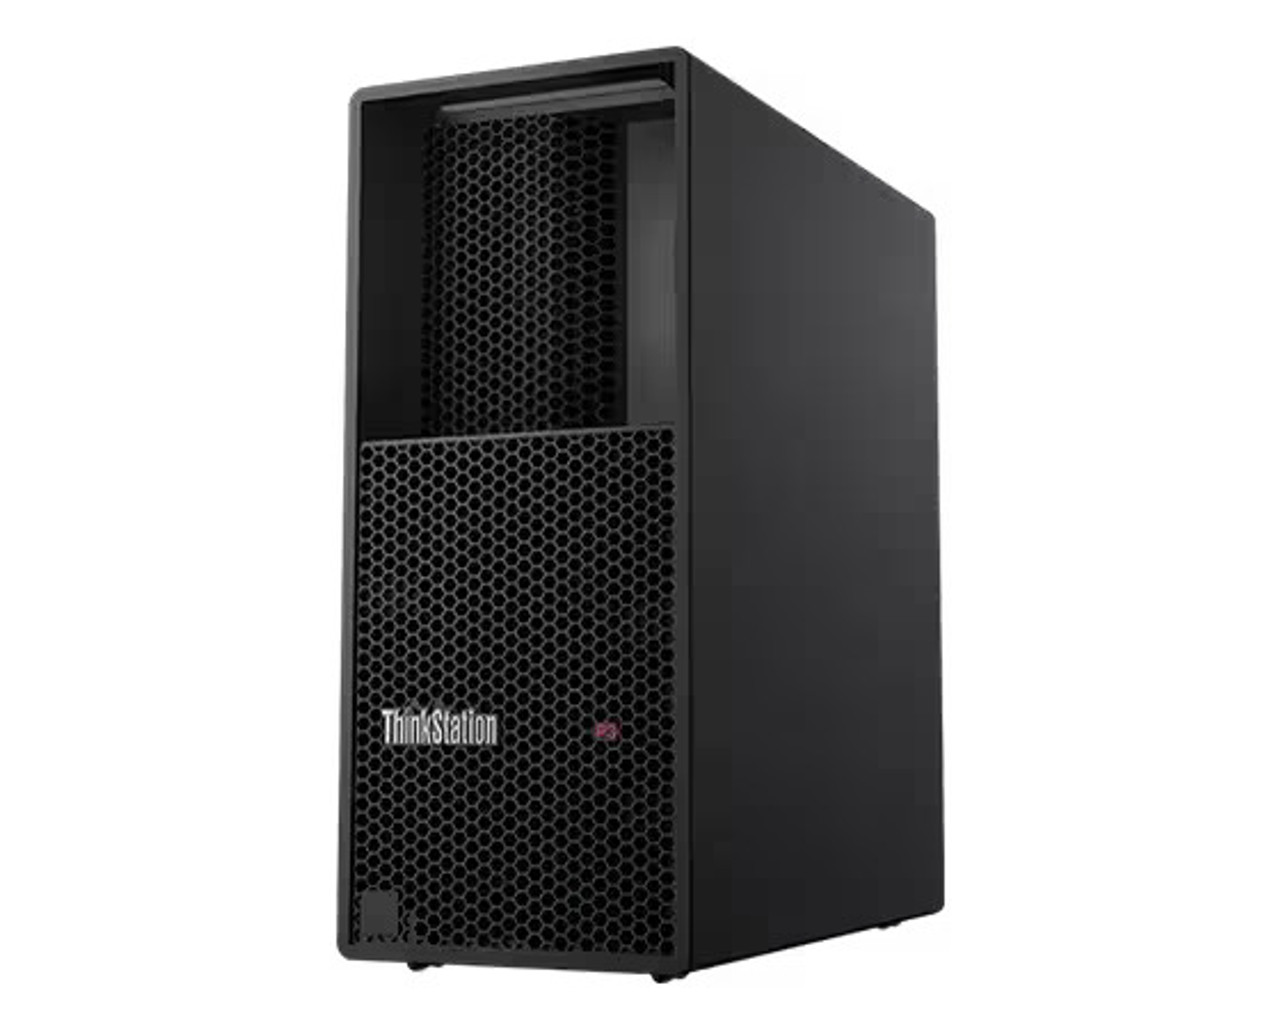 Lenovo ThinkStation P3 Tower i5-13500 (E-cores up to 3.50 GHz P-cores up to 4.80 GHz) 16 GB DDR5-4400MHz 512 GB SSD Integrated graphic no DVD 750W USB Kbd USB mouse FreeDOS